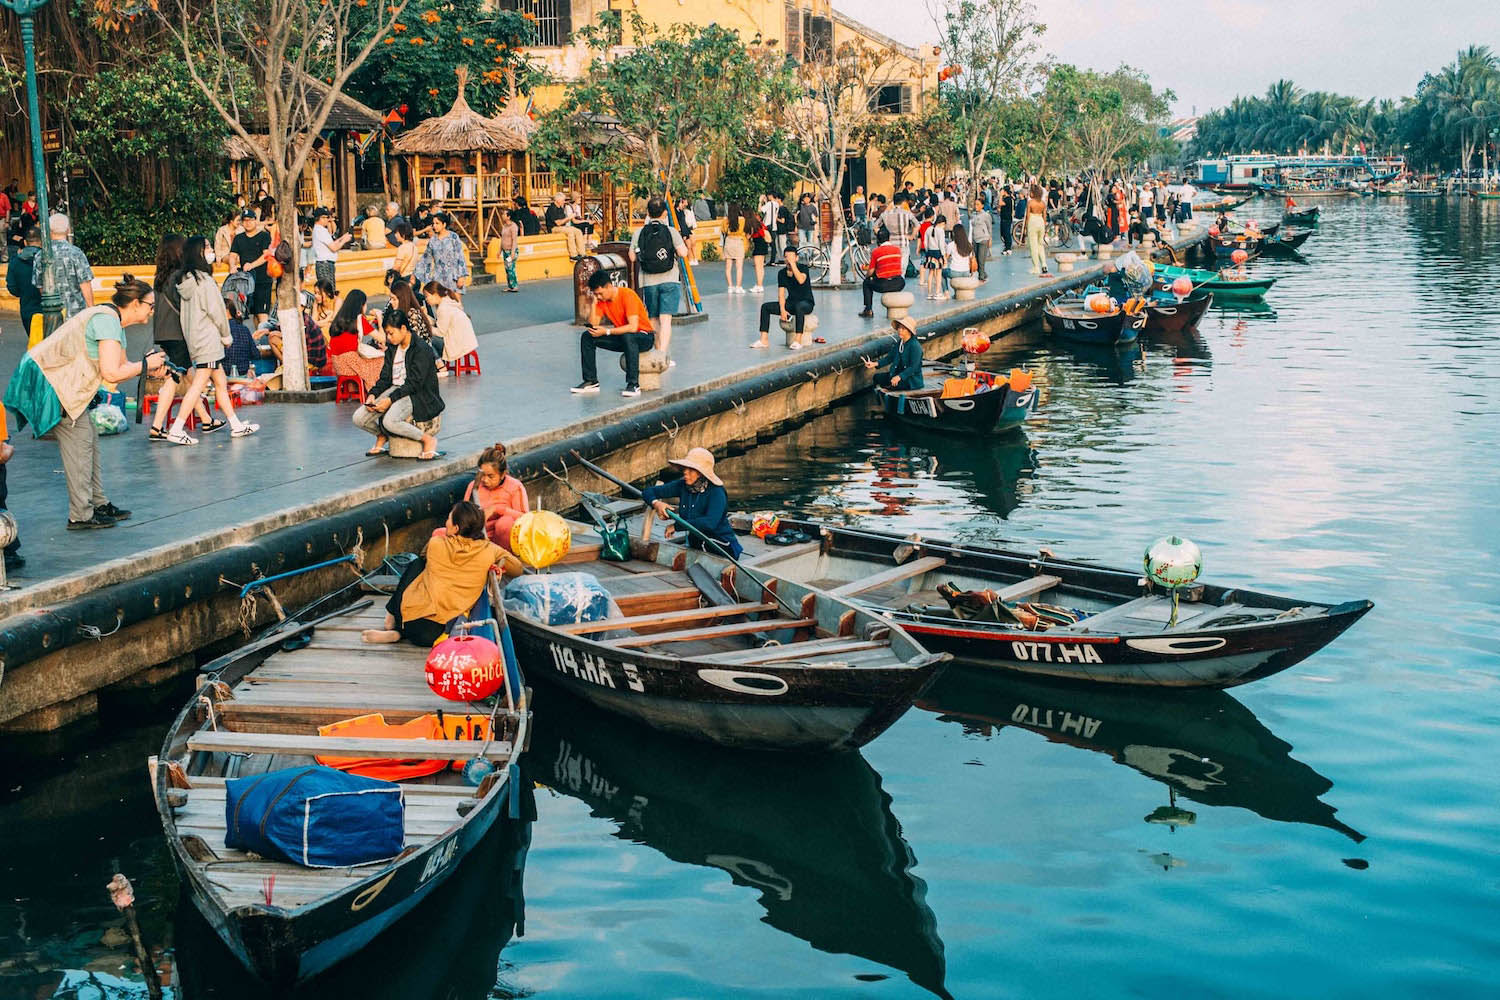 Old city of Hoi An with the canal, the tourists walking on the pavement, and 3 boats on the water during golden hour